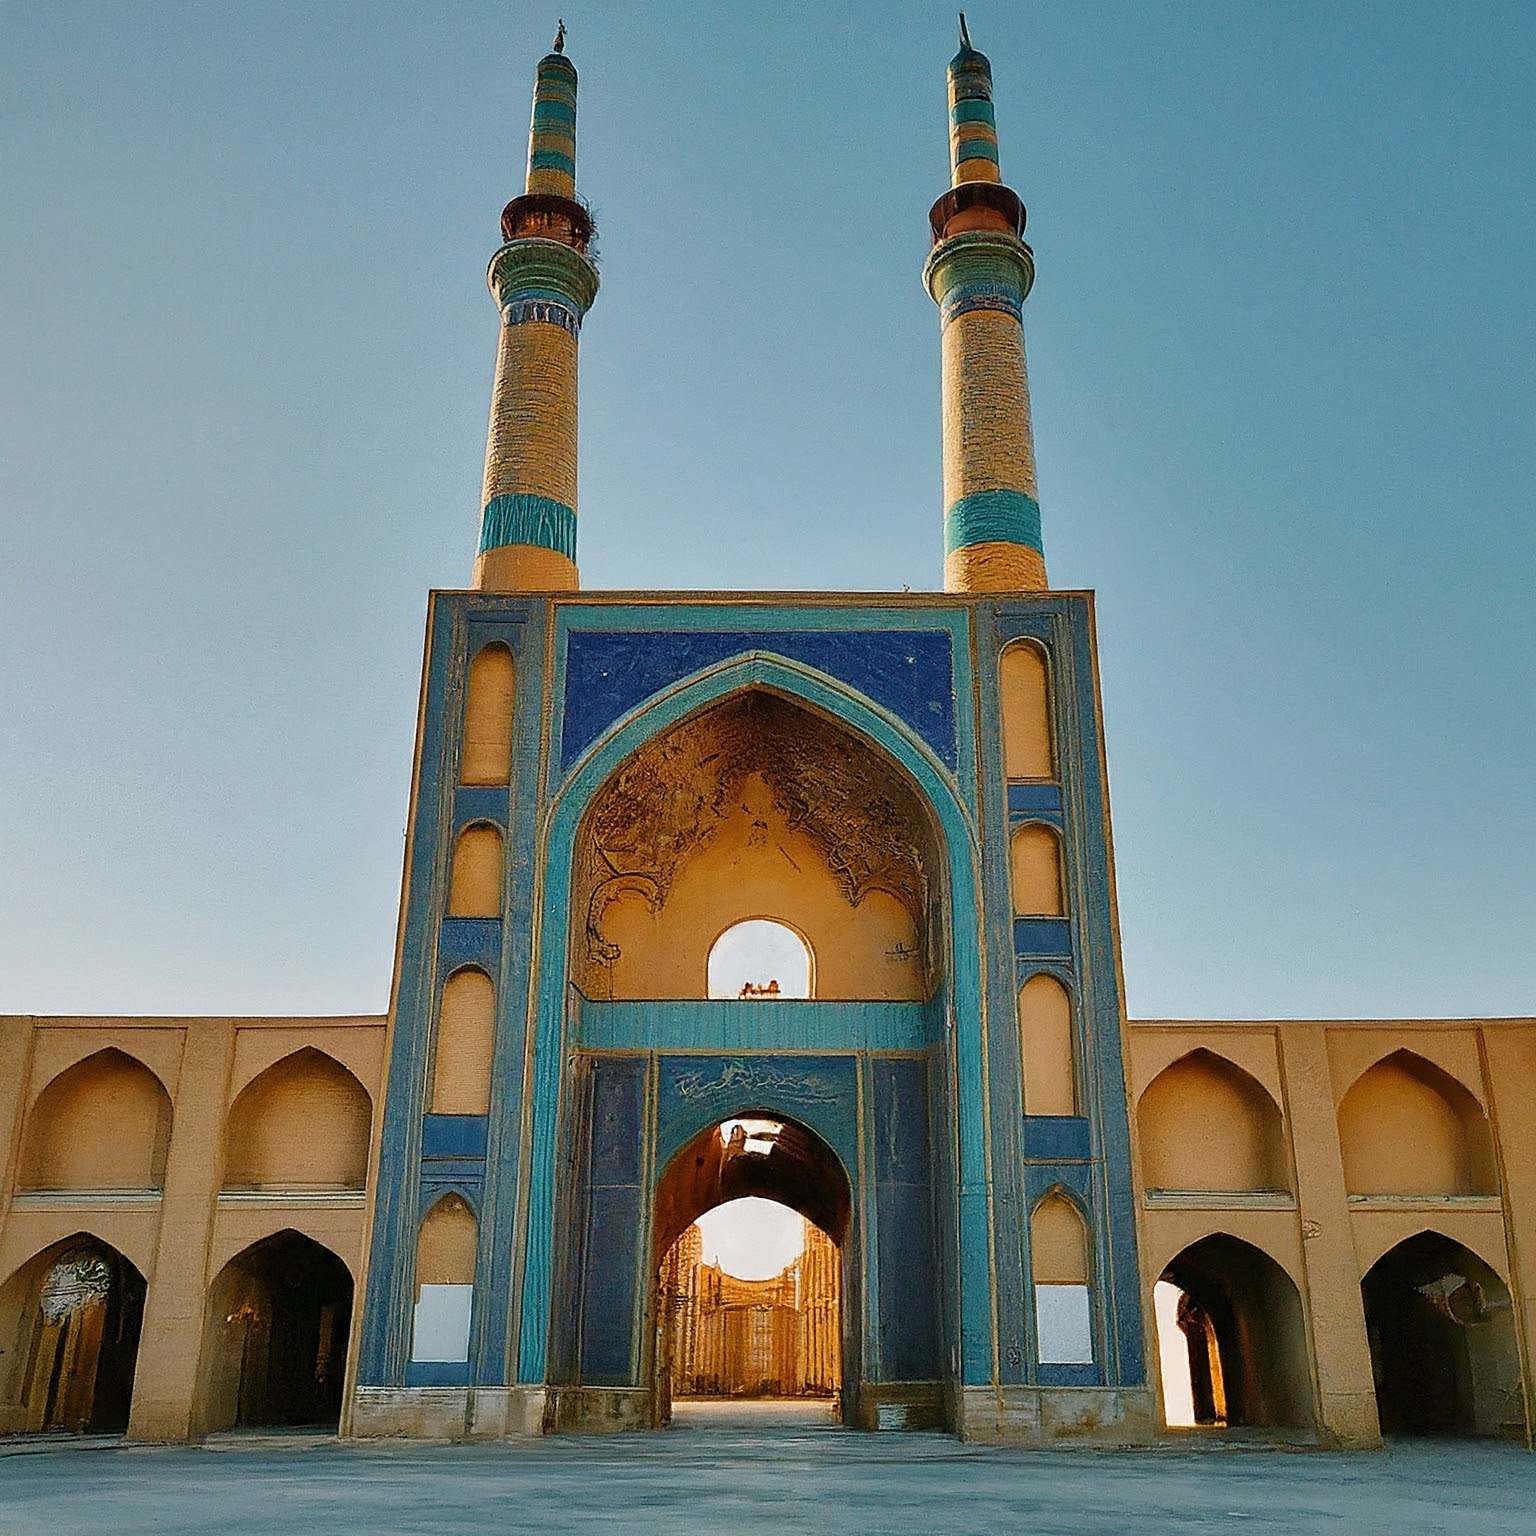 Friday Mosque in Yazd, Iran, with towering minarets and geometric façade patterns.